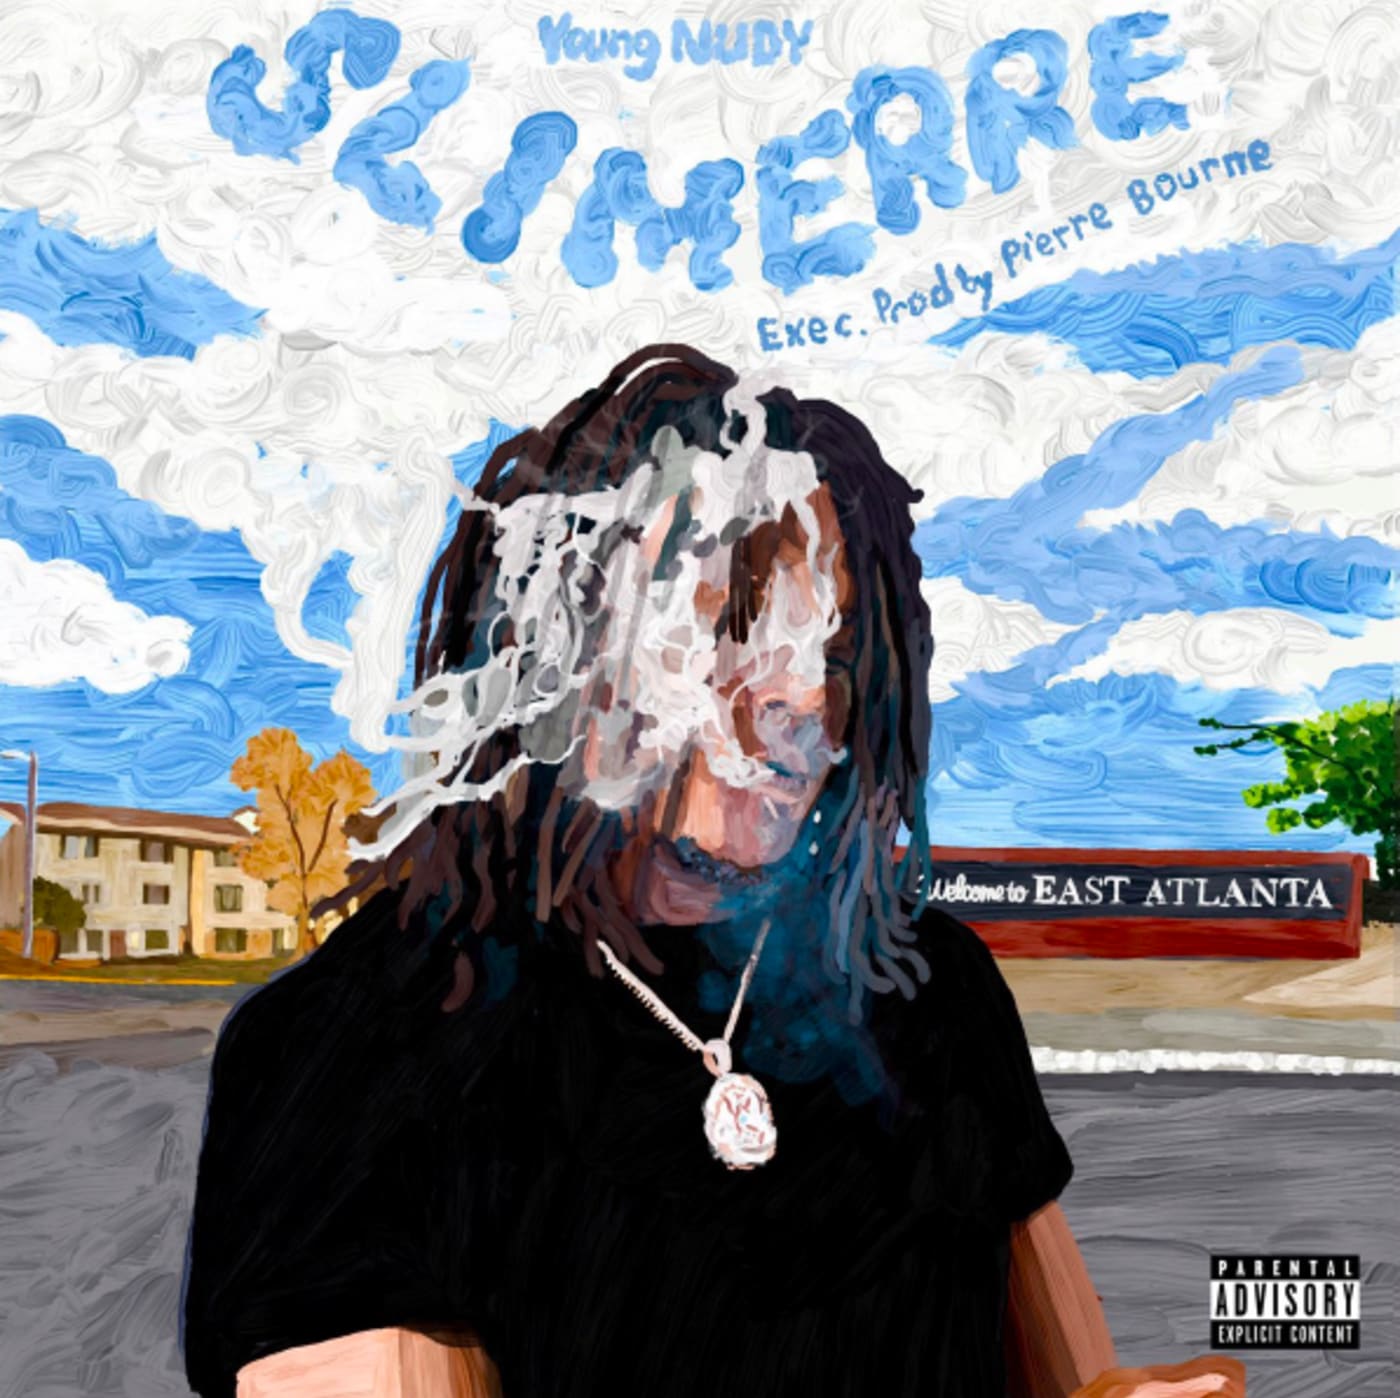 Young Nudy and Pi'erre Bourne 'Slimerre'